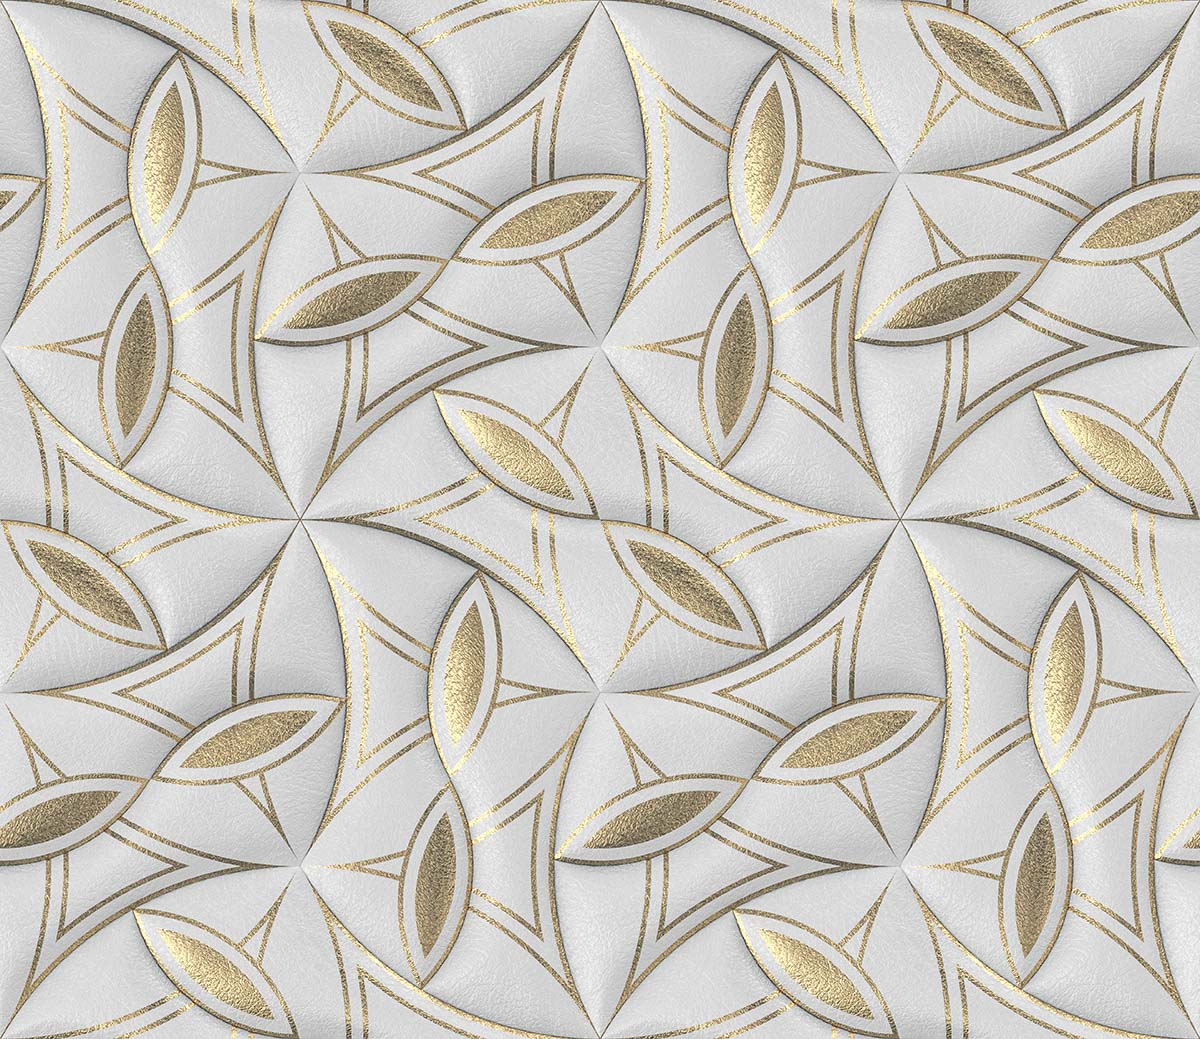 A white and gold patterned surface